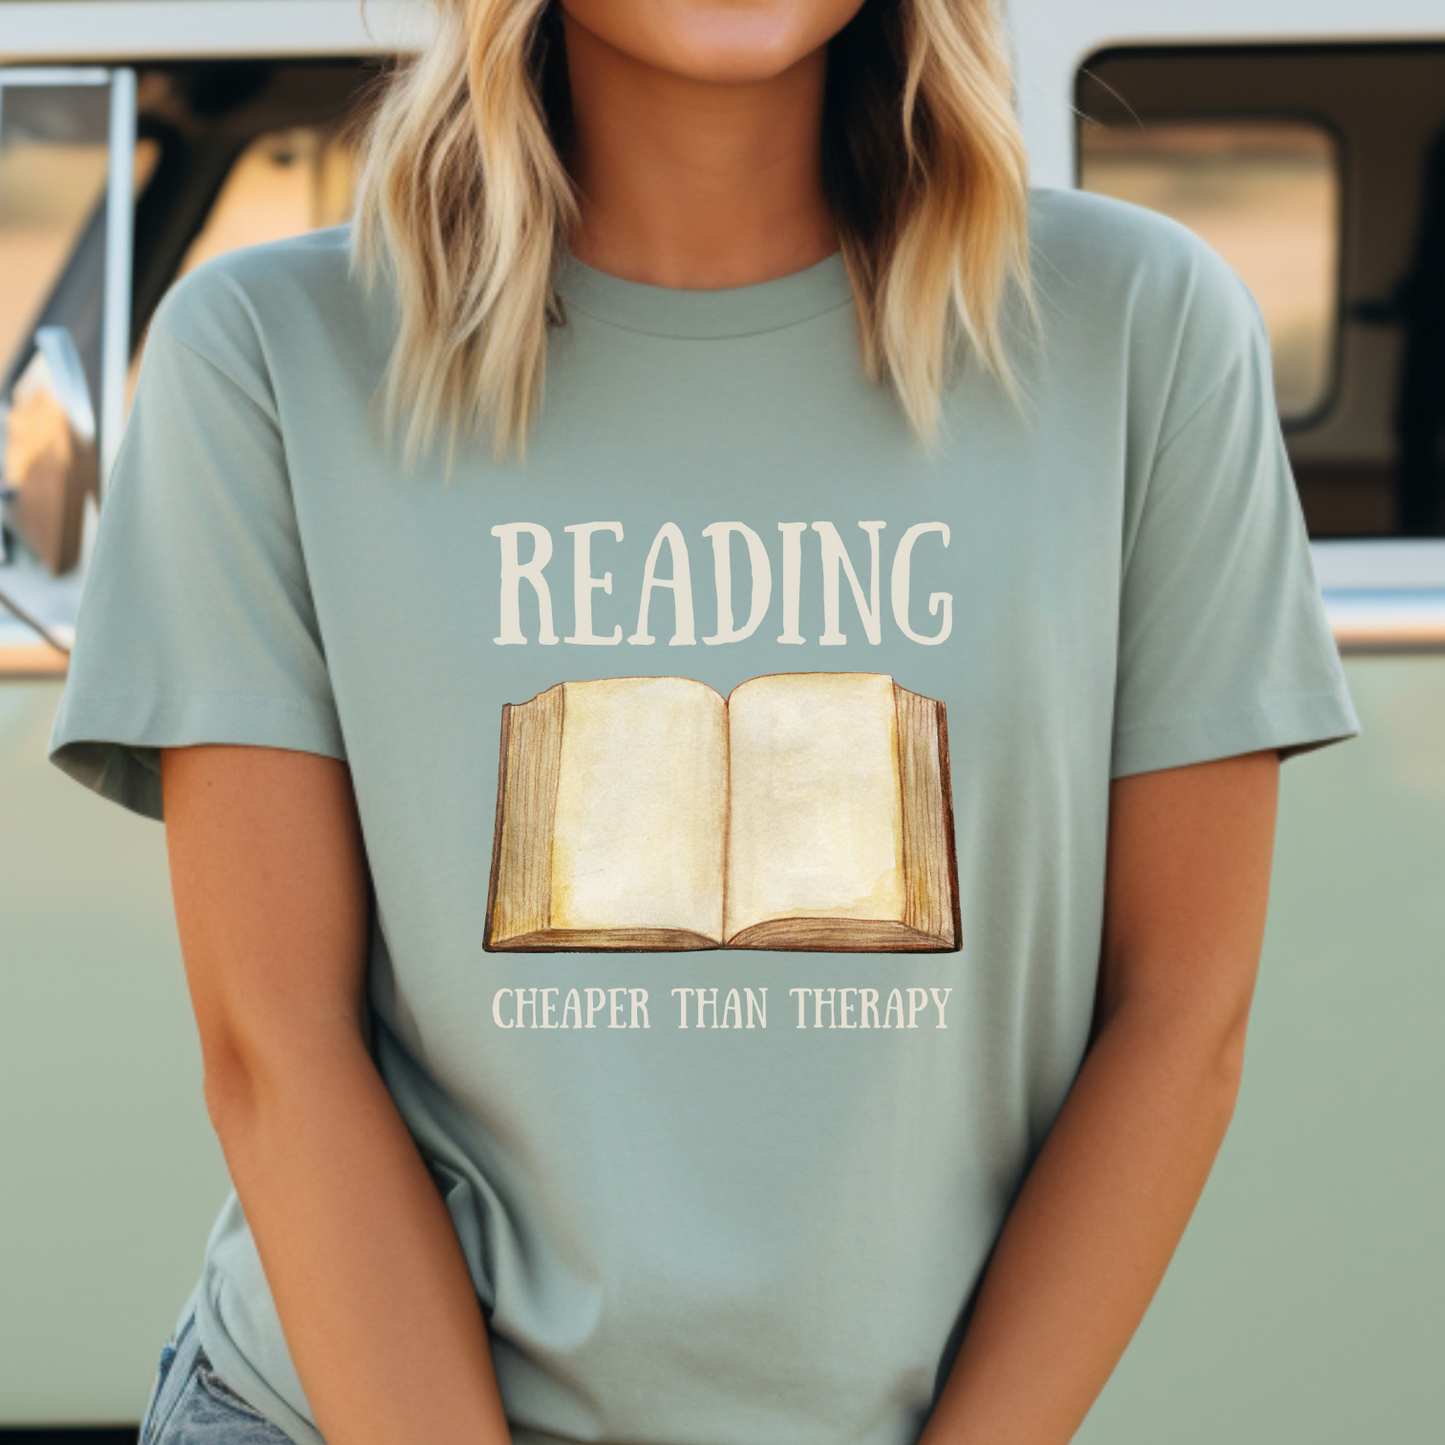 This dusty blue tee is a comfy addition to any bibliophile's apparel, who appreciates the fact that reading really is the best therapy.